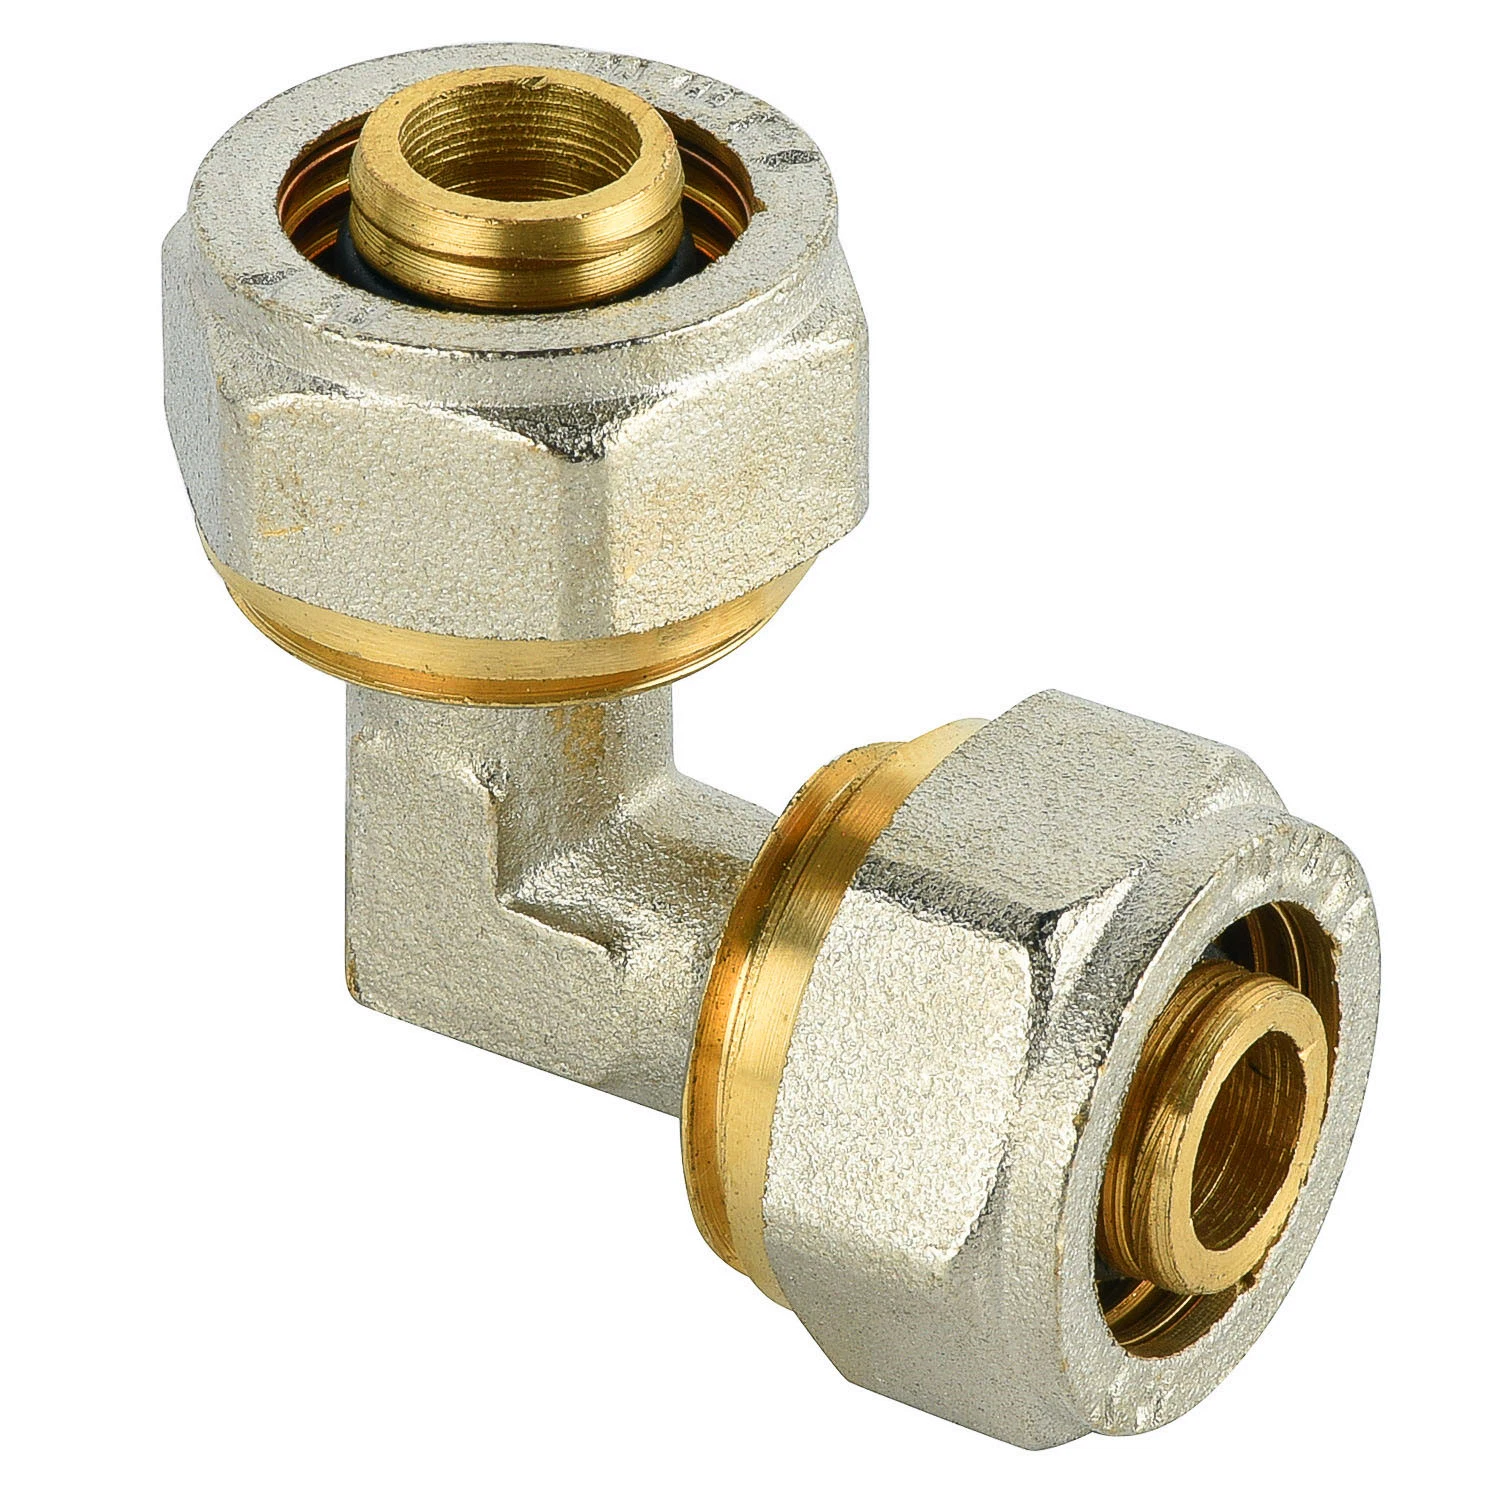 Brass Compression Fitting Brass Elbow Pex Pipe Fitting Water Tubing Pex Compression Fitting